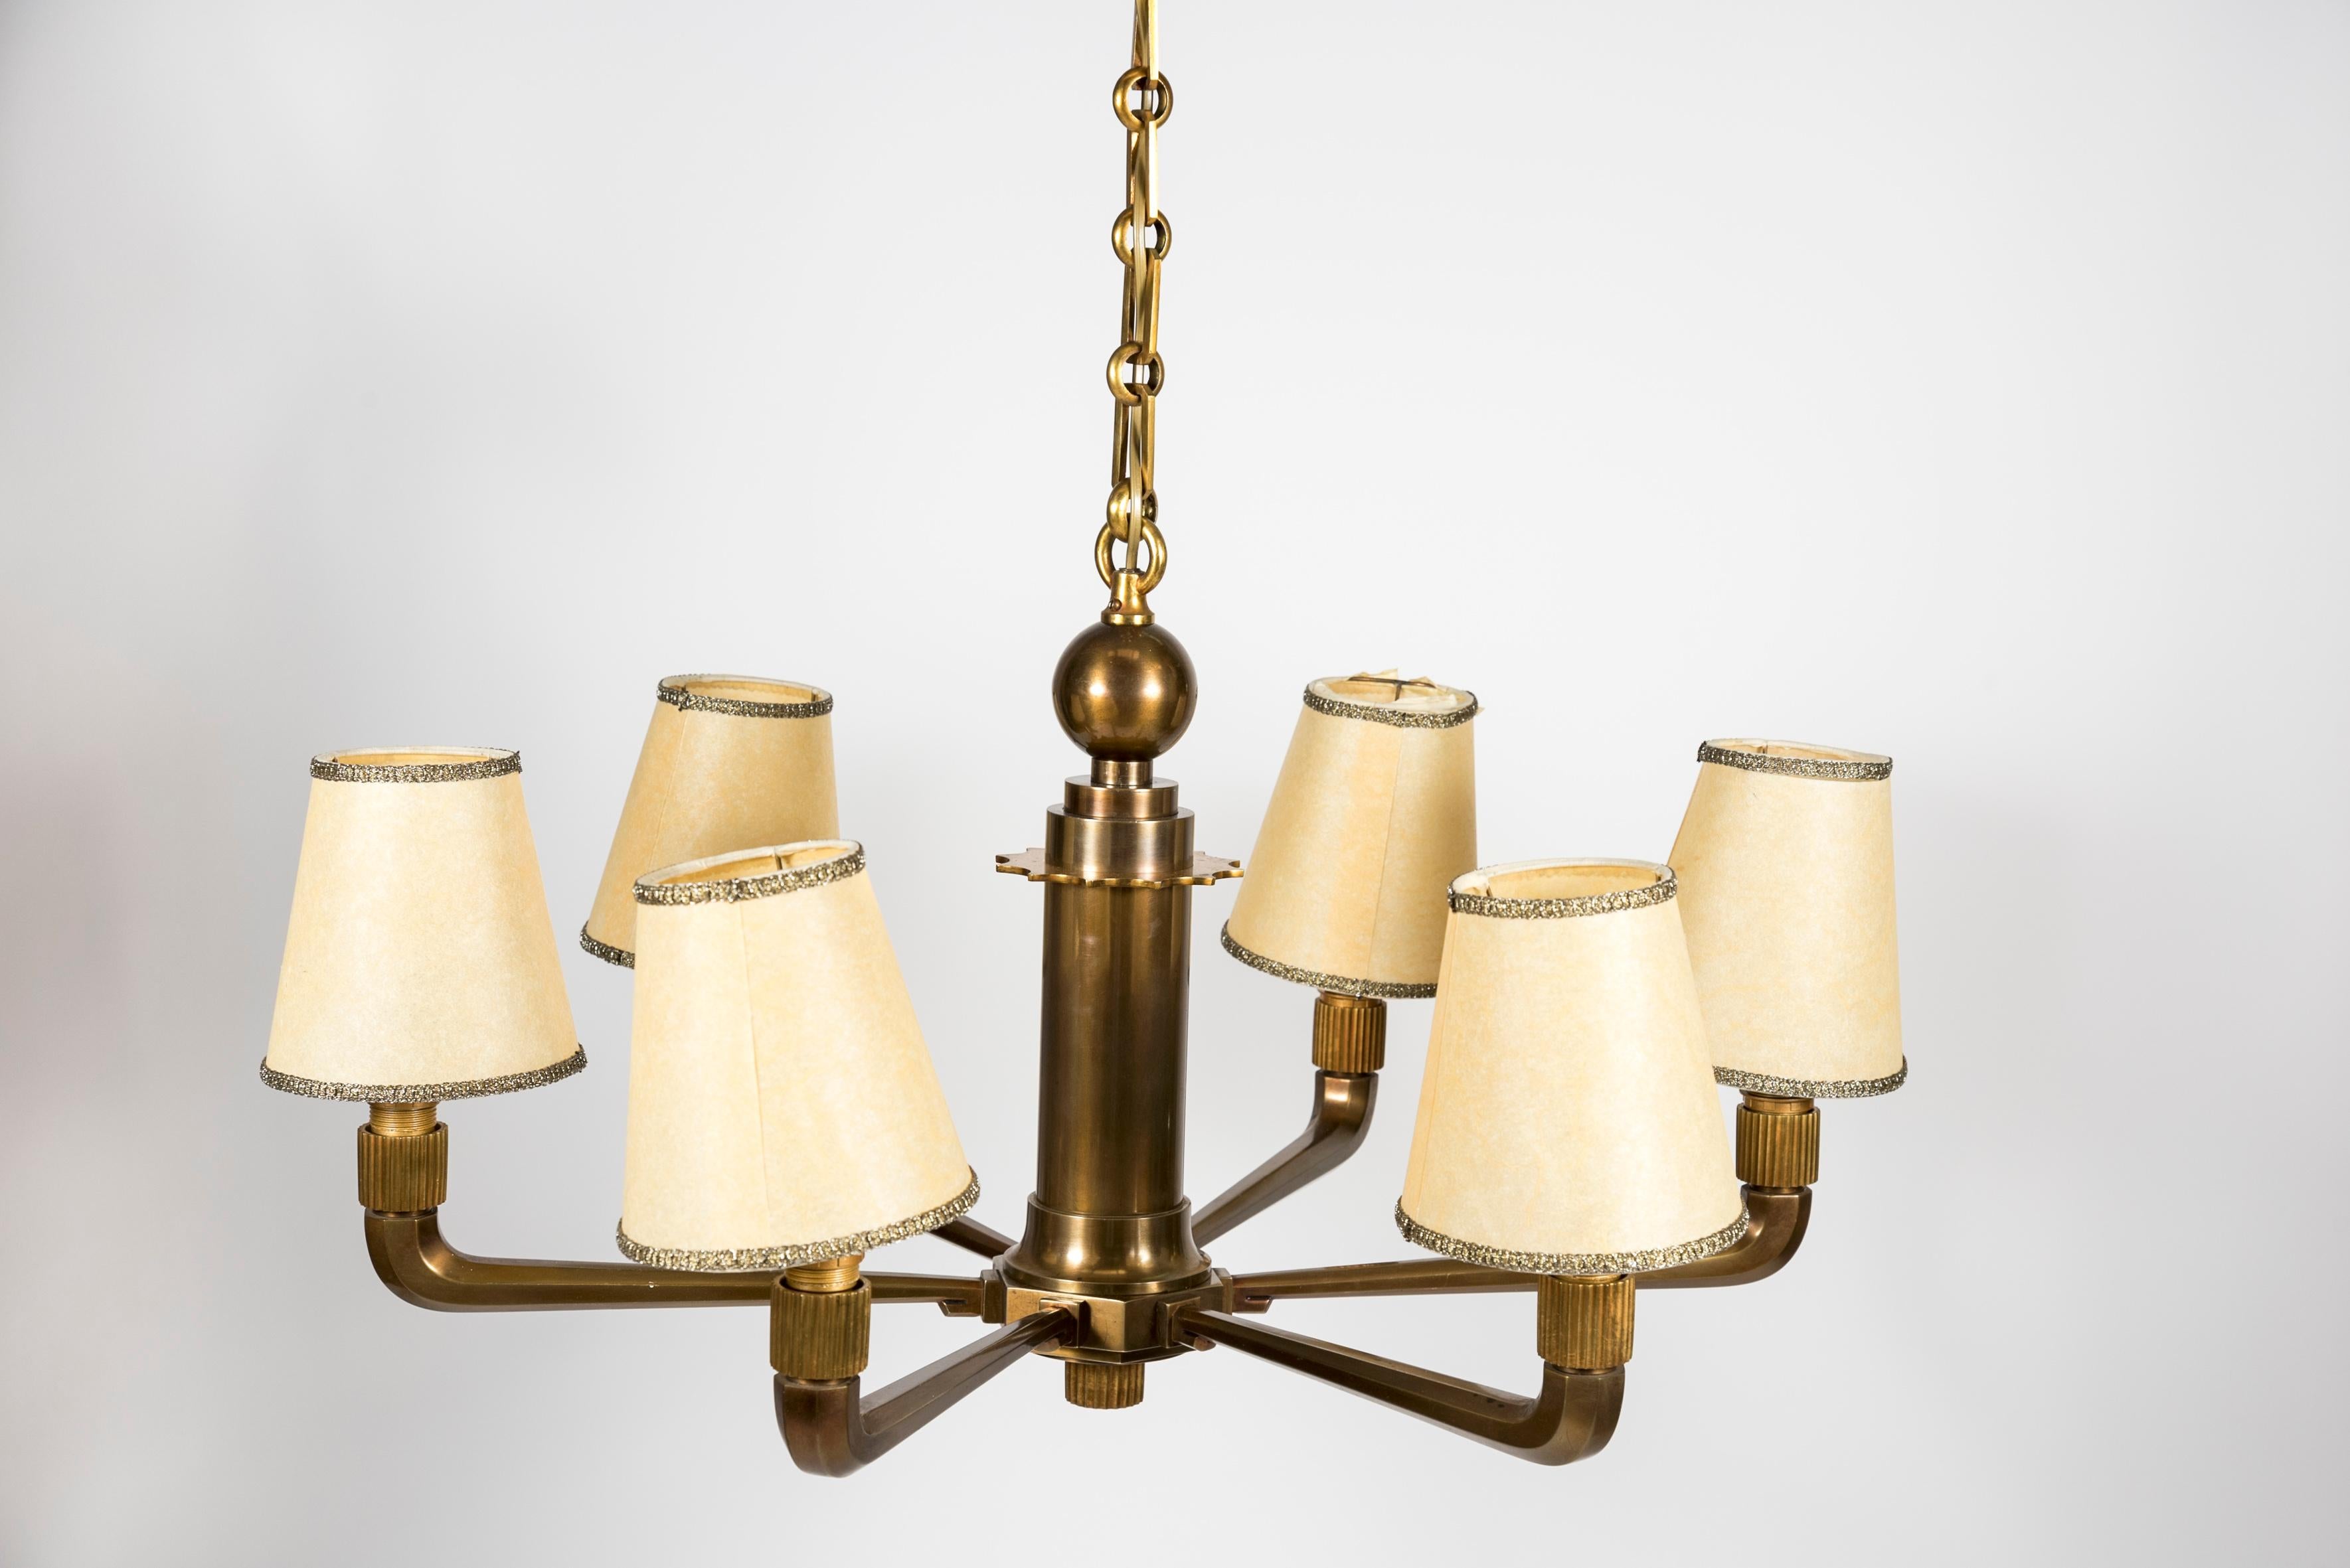 1940s bronze chandelier with beautiful patina
40 cm tall + Chaine = 90 cm
France
Newly re-wired
No shade included.